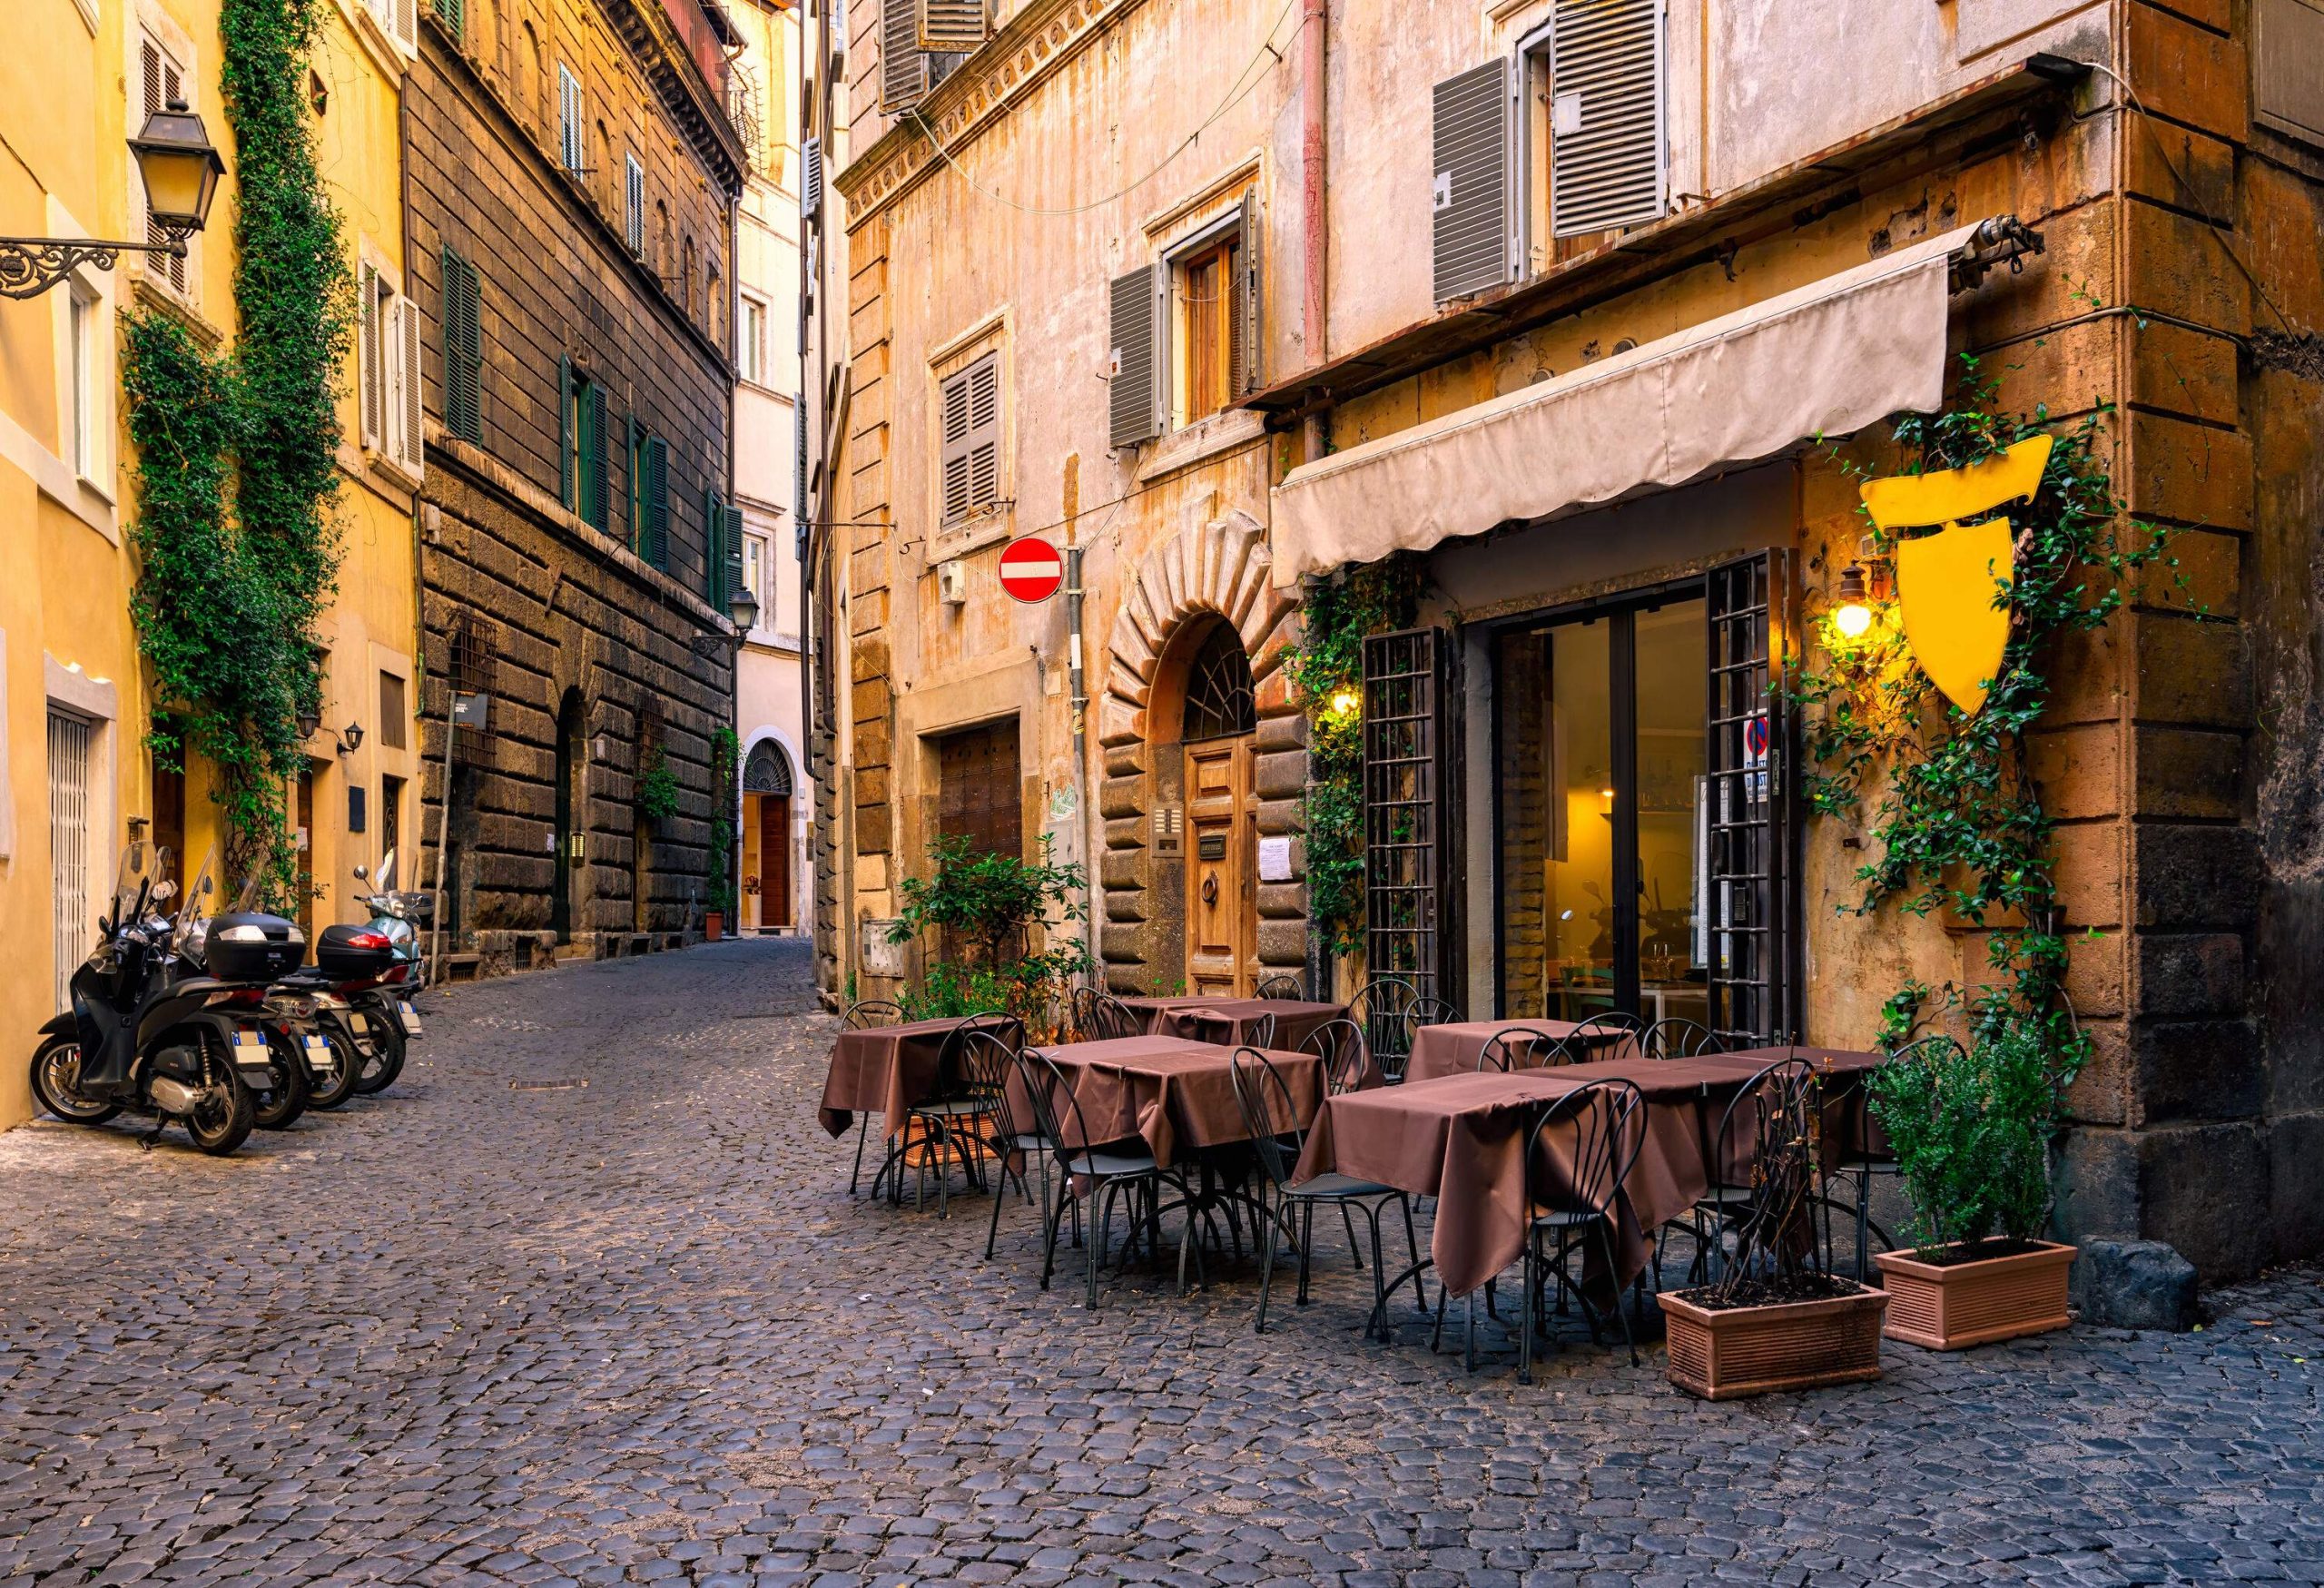 A cosy ambiance of an old stone-paved street, rustic buildings, and charming al fresco dining areas.